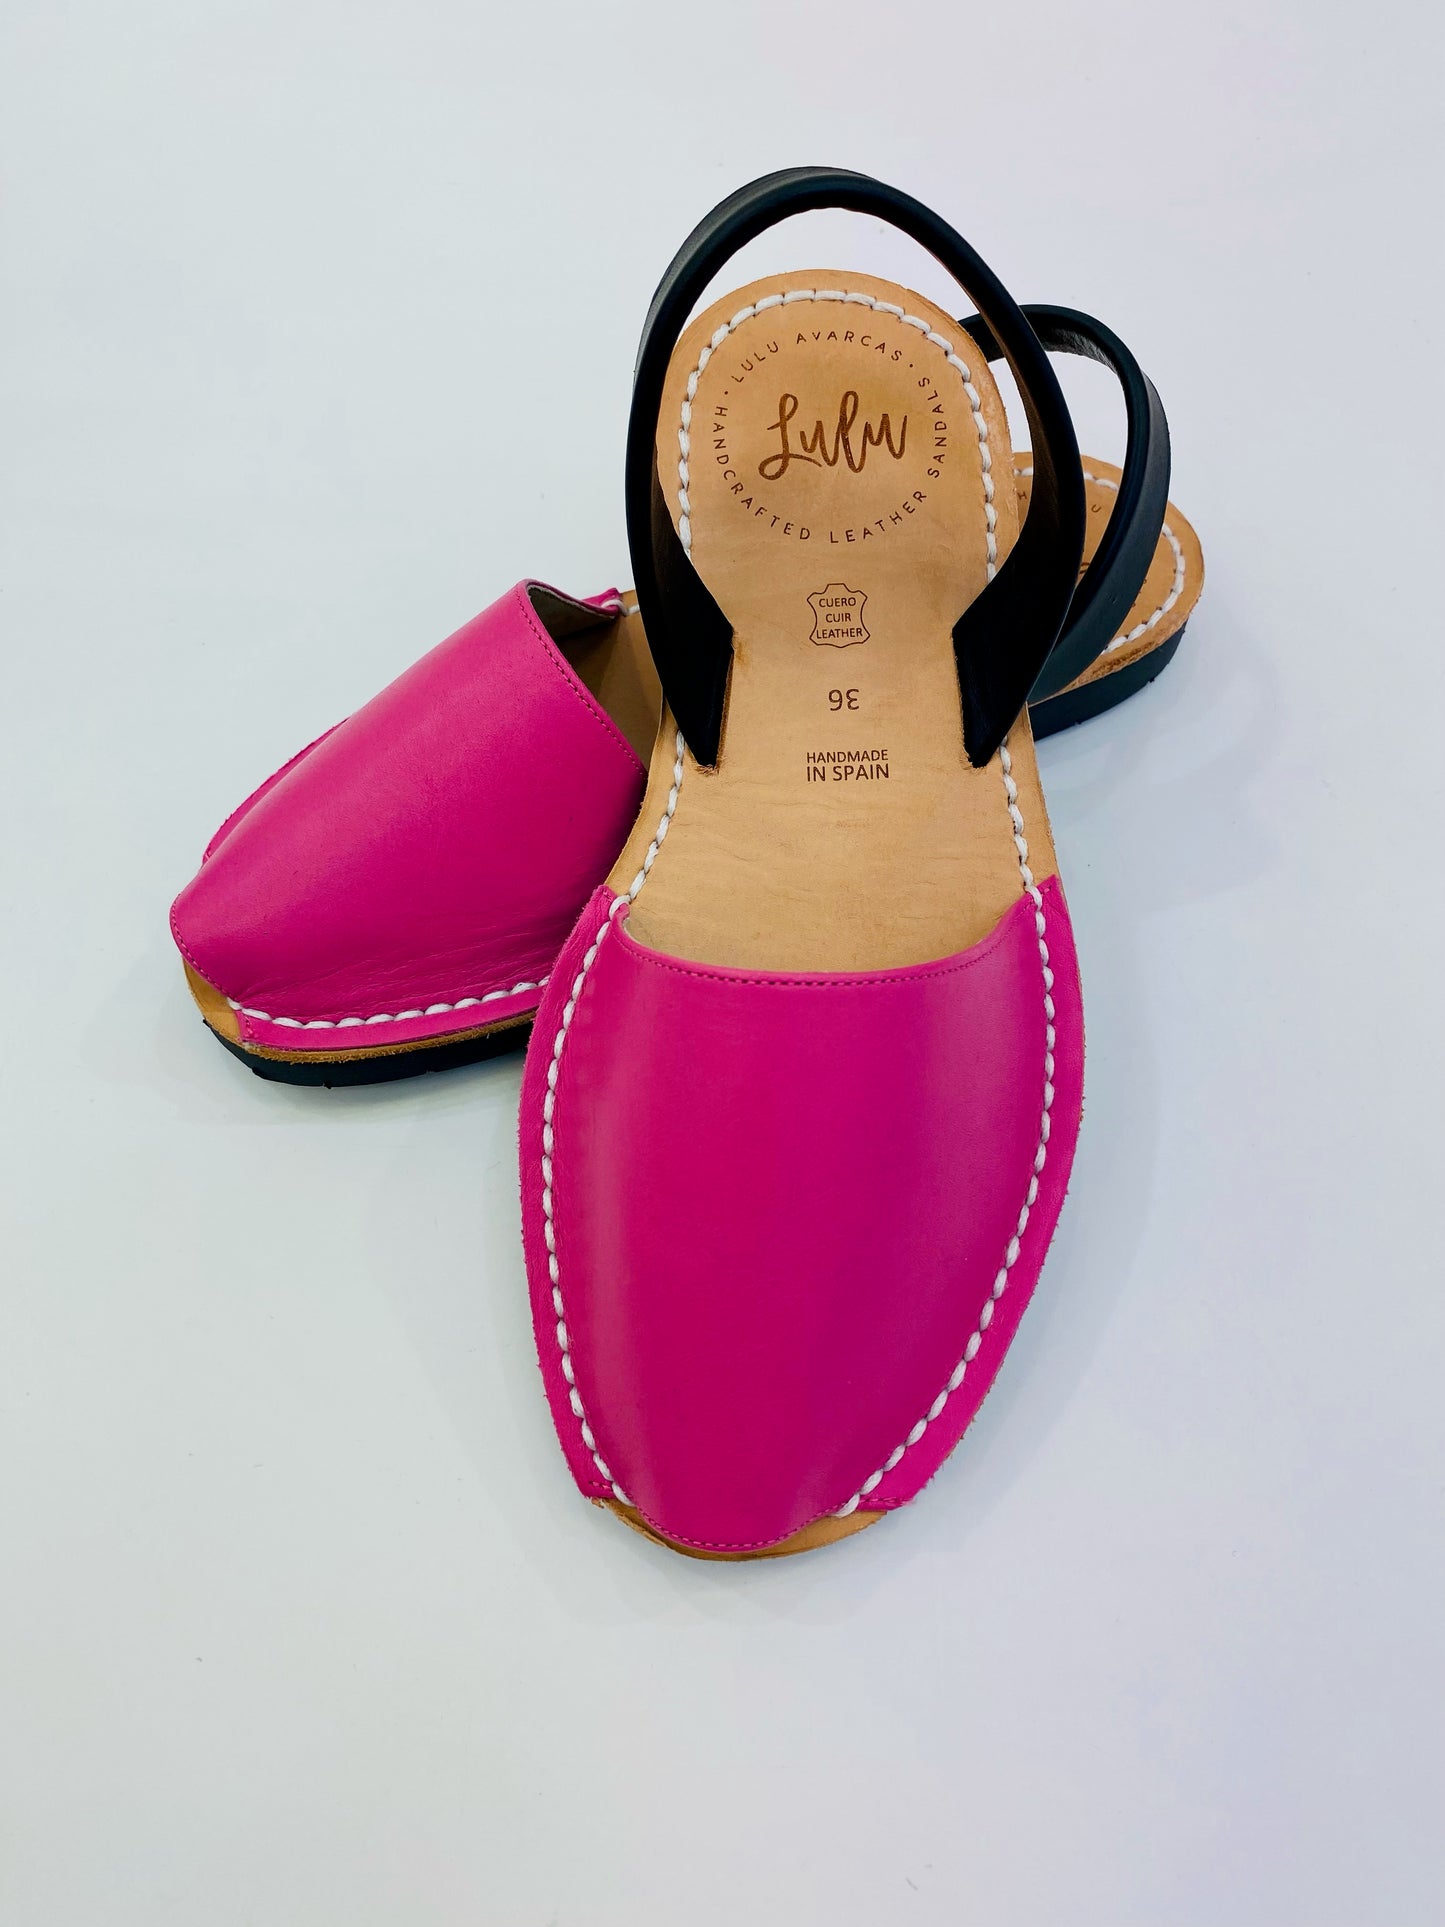 LULU AVARCAS LEATHER FLAT SANDAL IN PINK WITH BLACK STRAP